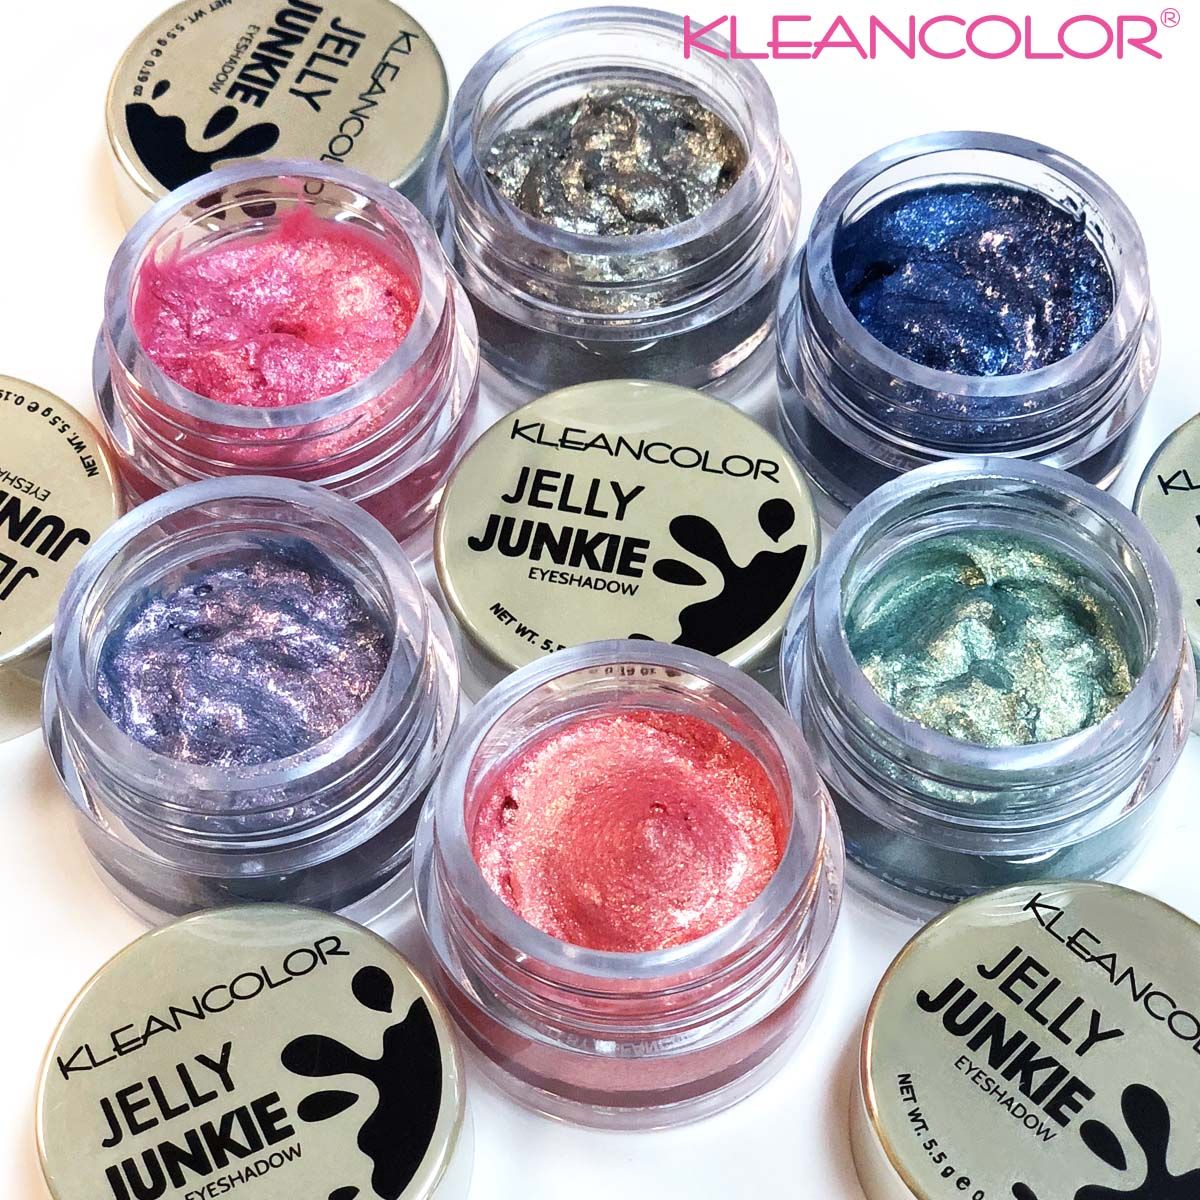 Jelly Junkie eyeshadow has an innovative, boingy  jelly-like texture that goes on smooth and dries down to a matte feel.jpeg